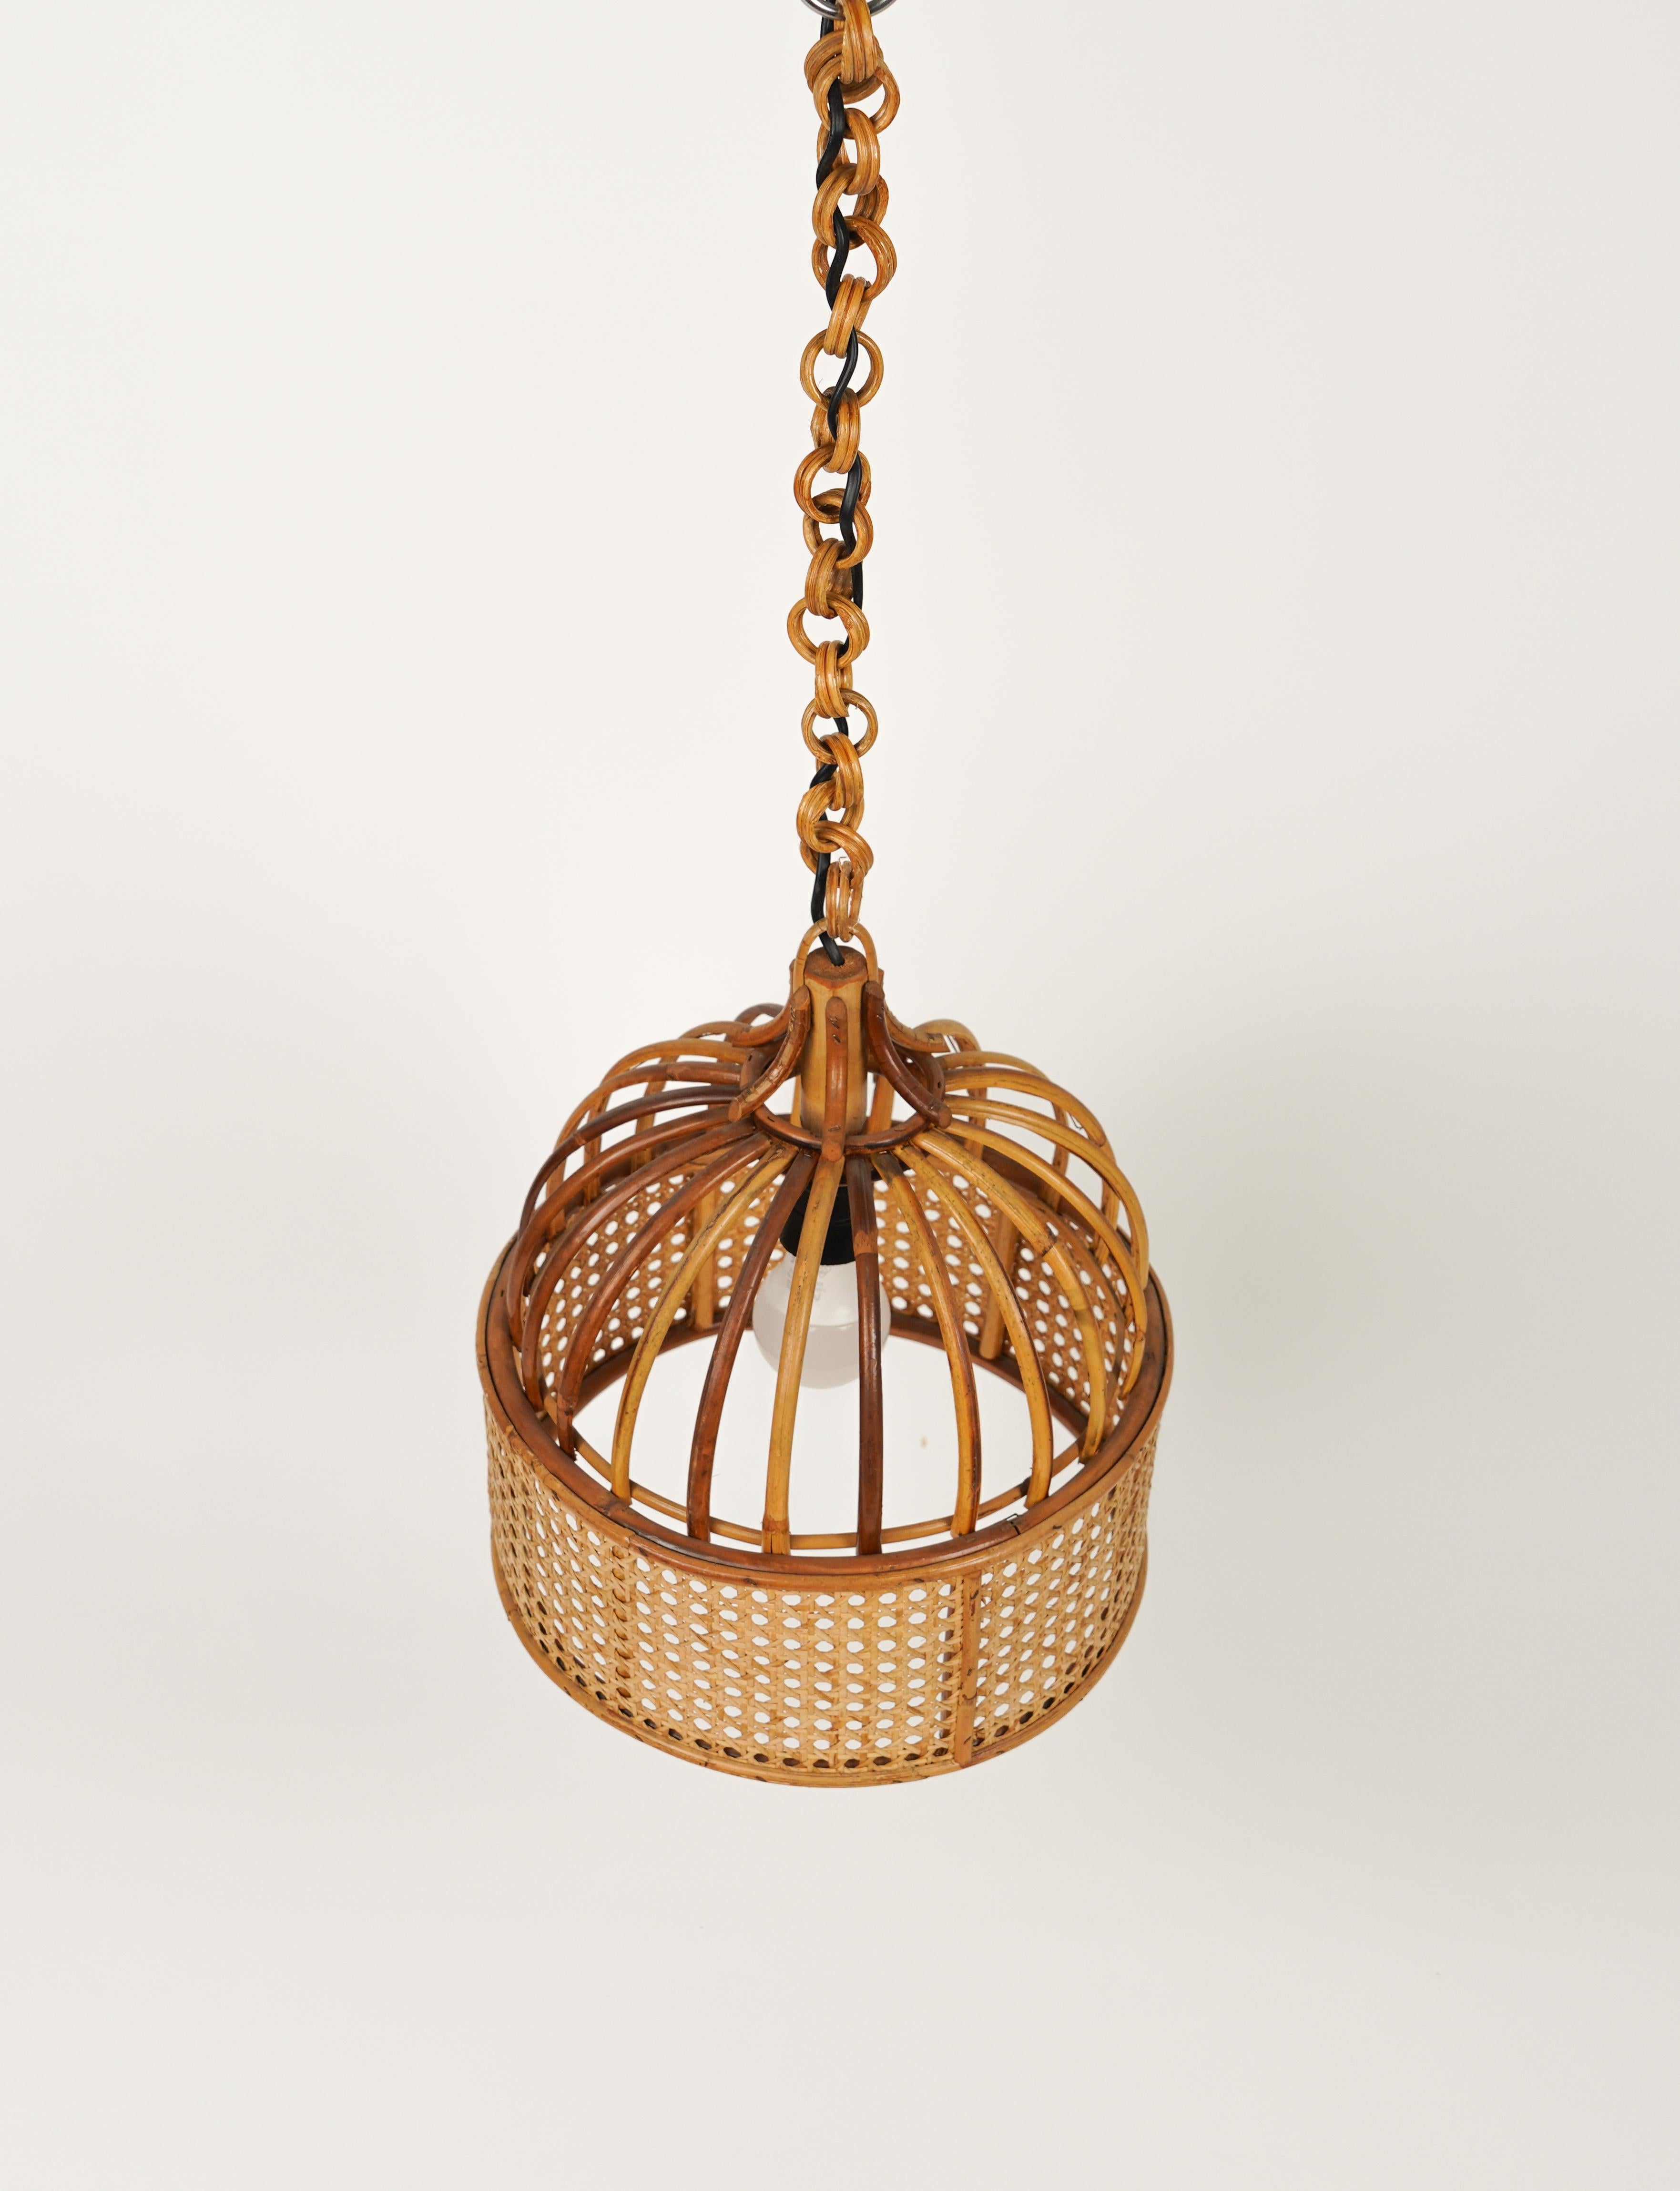 Late 20th Century Midcentury French Riviera Rattan and Wicker Chandelier, Italy 1970s For Sale